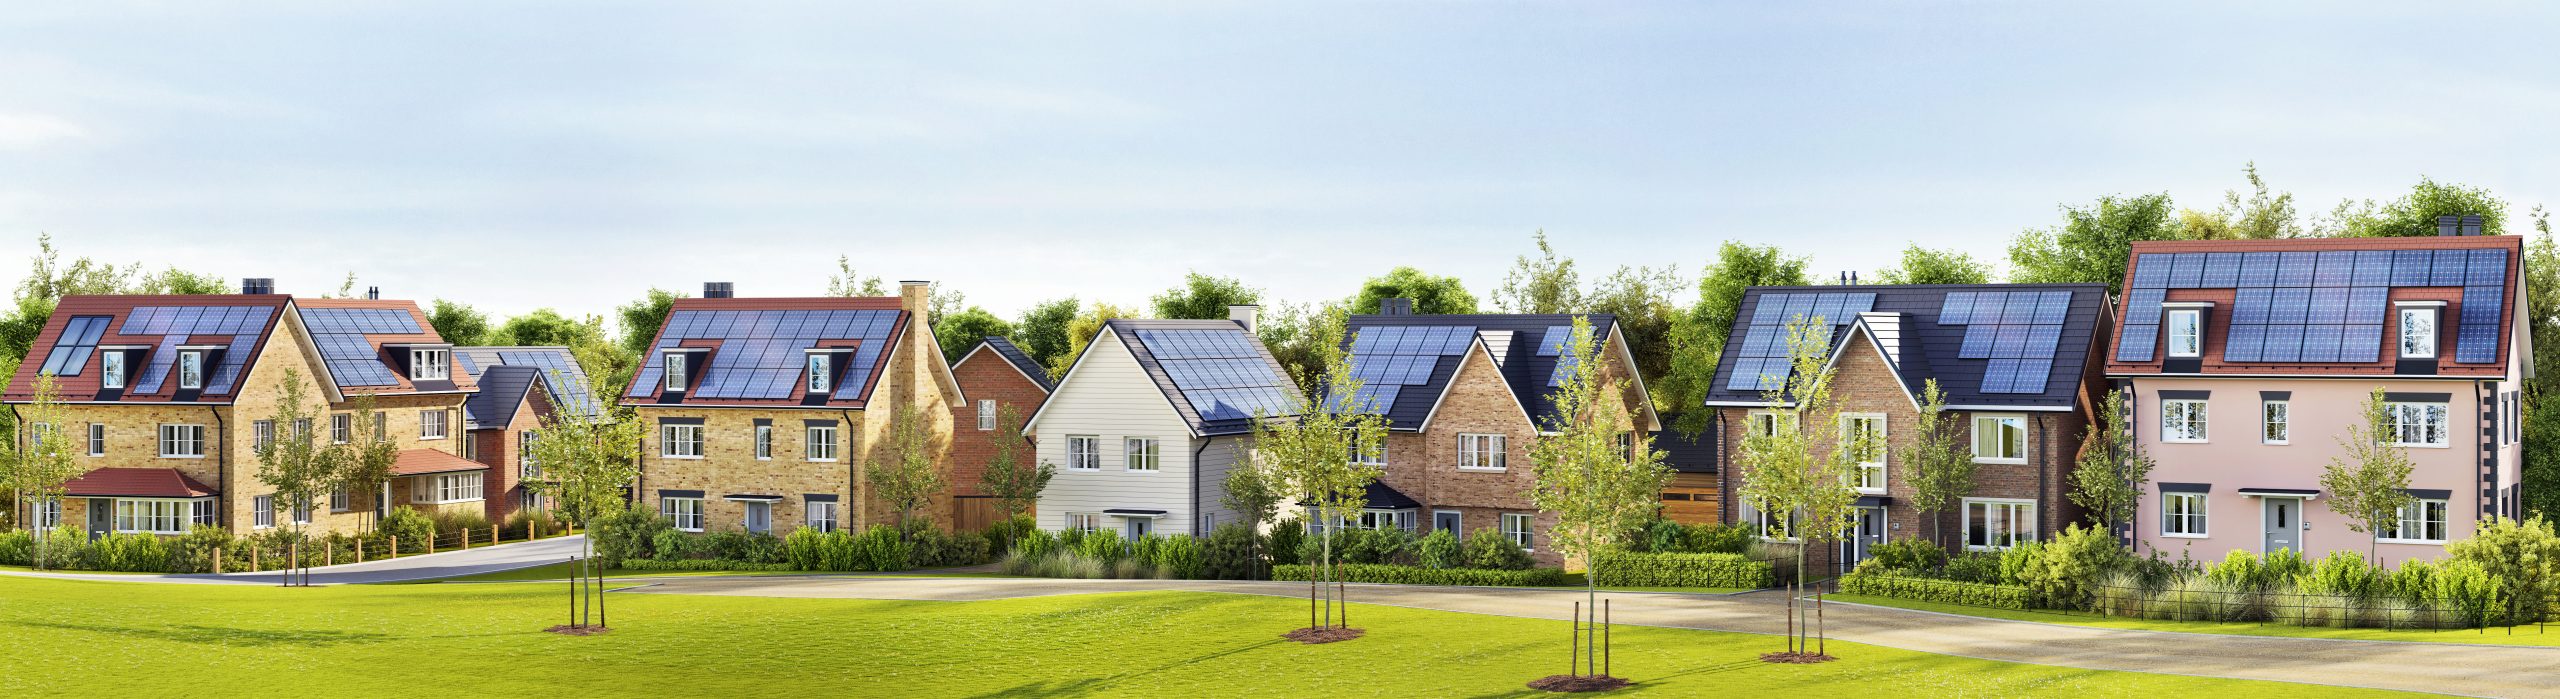 solar panel roofs on houses